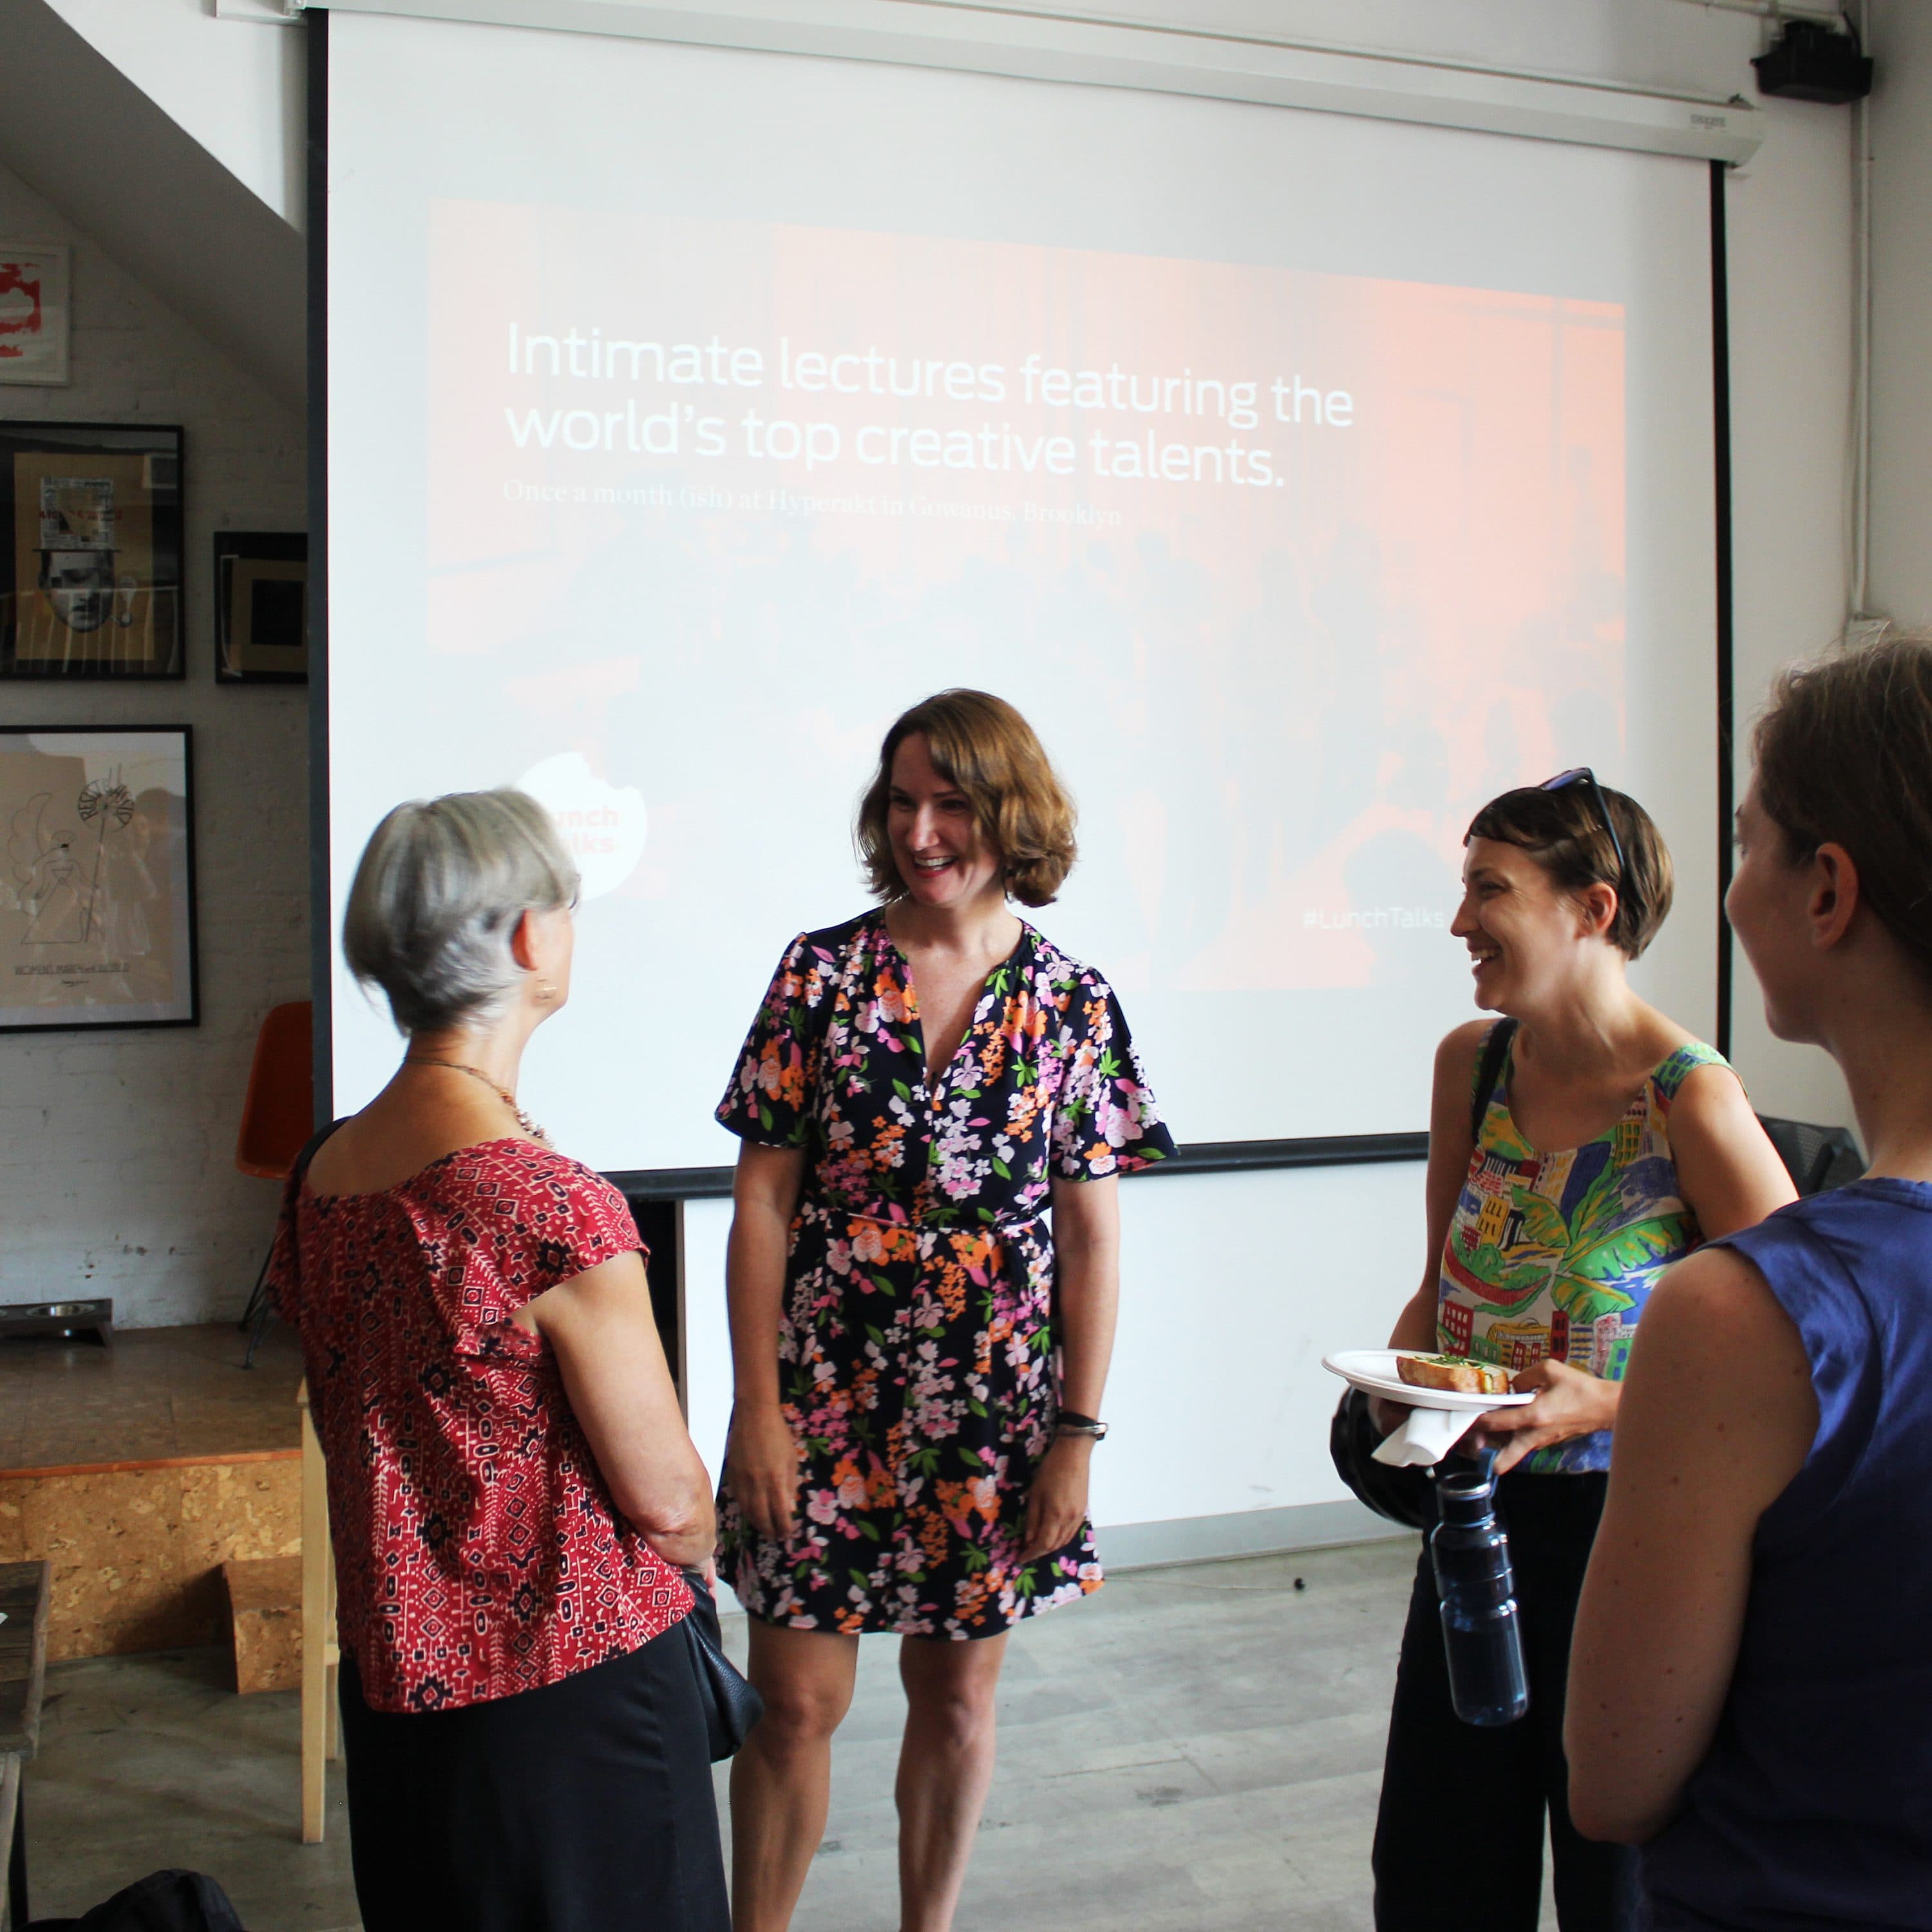 Four women are chatting and smiling in a casual indoor setting with art on the wall and a projection screen in the background. The screen displays the text: "Intimate lectures featuring the world's top creative talents." One woman is holding a camera.